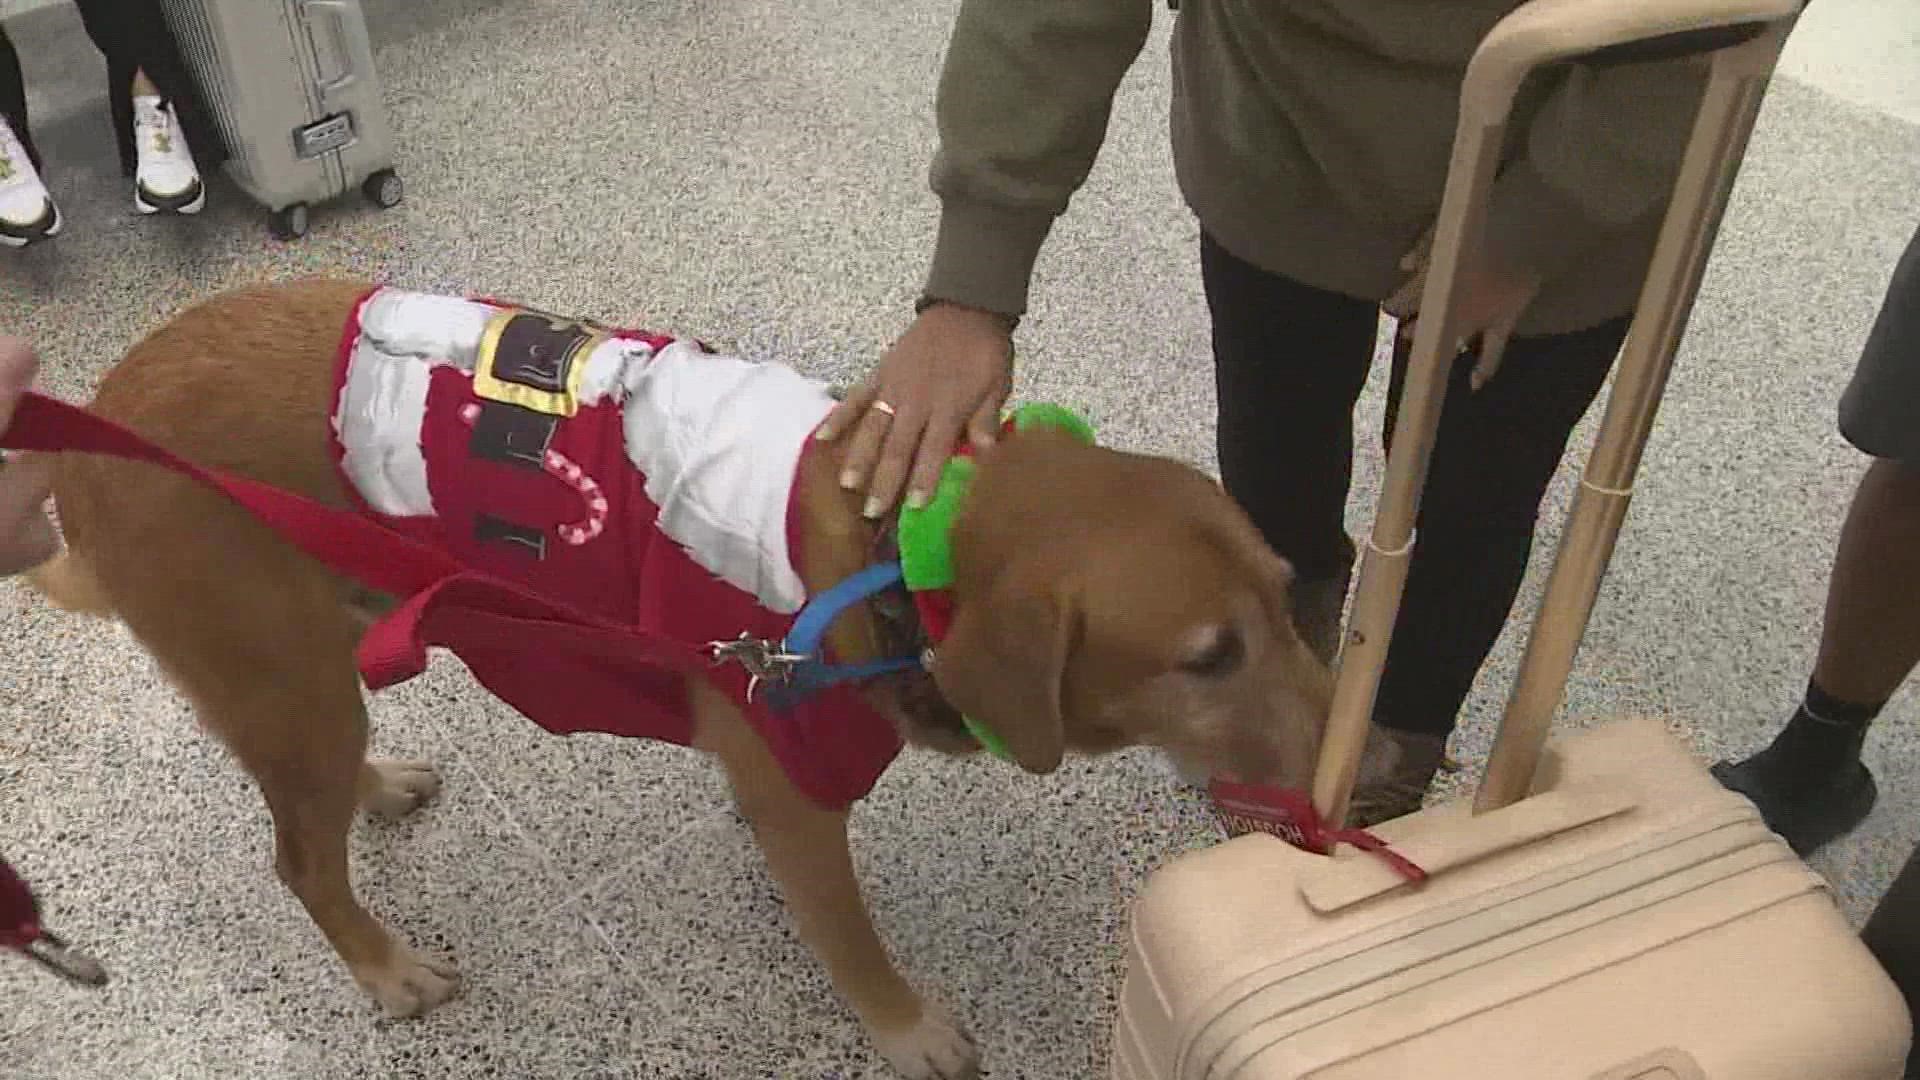 As thousands of travelers at Bush Intercontinental Airport started their holiday, therapy dogs Shotgun and Clyde were hard at work.